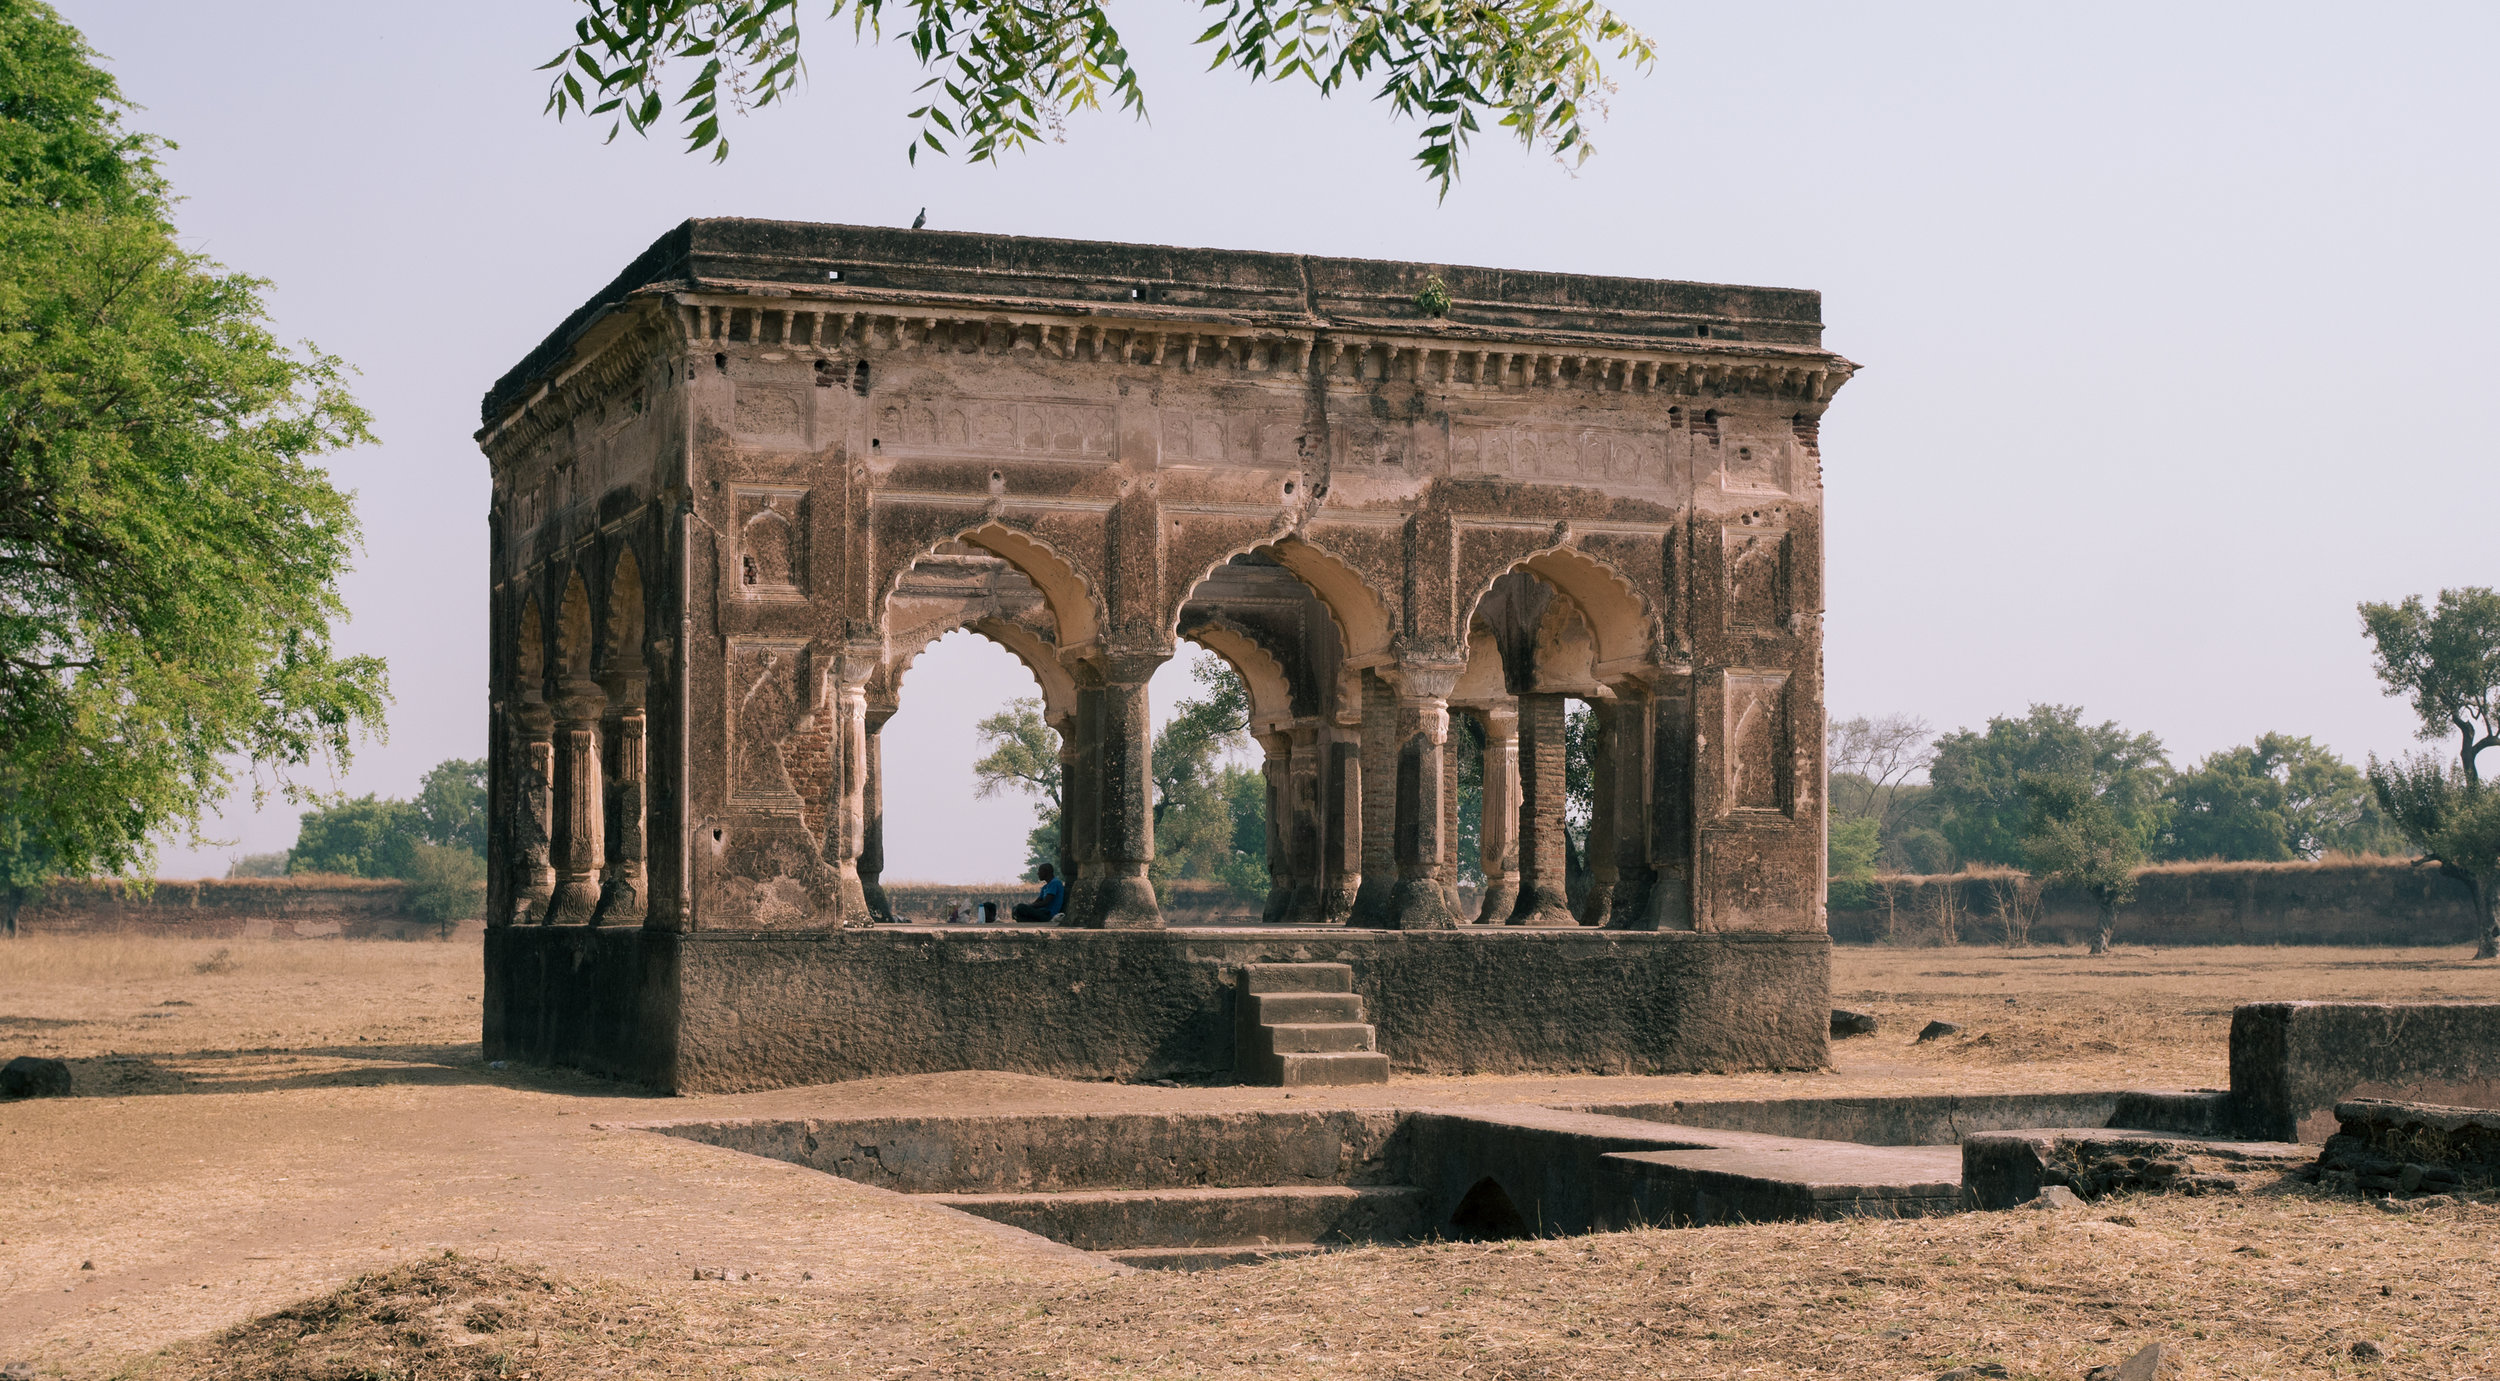  The body of Mumtaz Mahal was laid to rest here for six months before it was transported to Agra and eventually buried at the Taj Mahal.  